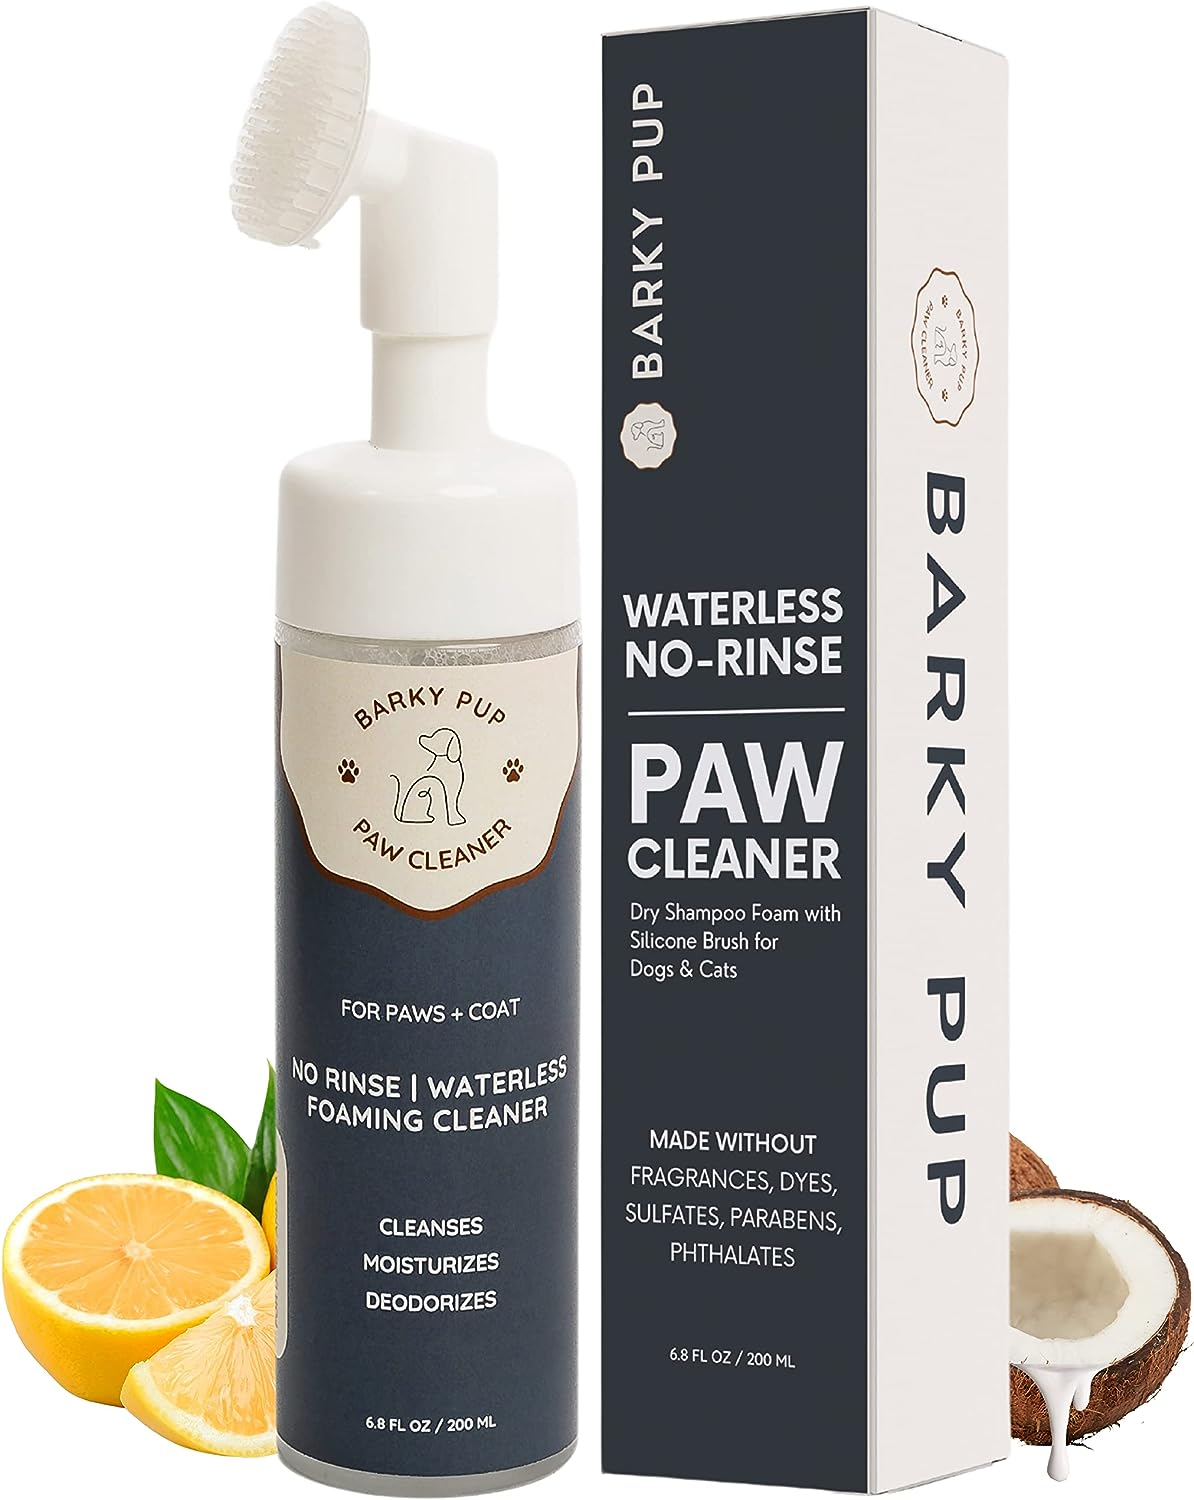 BARKY PUP Dog Paw Cleaner (6.8 fl oz) | No-Rinse Foaming Paw Cleanser | Gentle  Fragrance-Free | Natural Pet Paw Cleaner Quickly Cleans for Healthy Paws